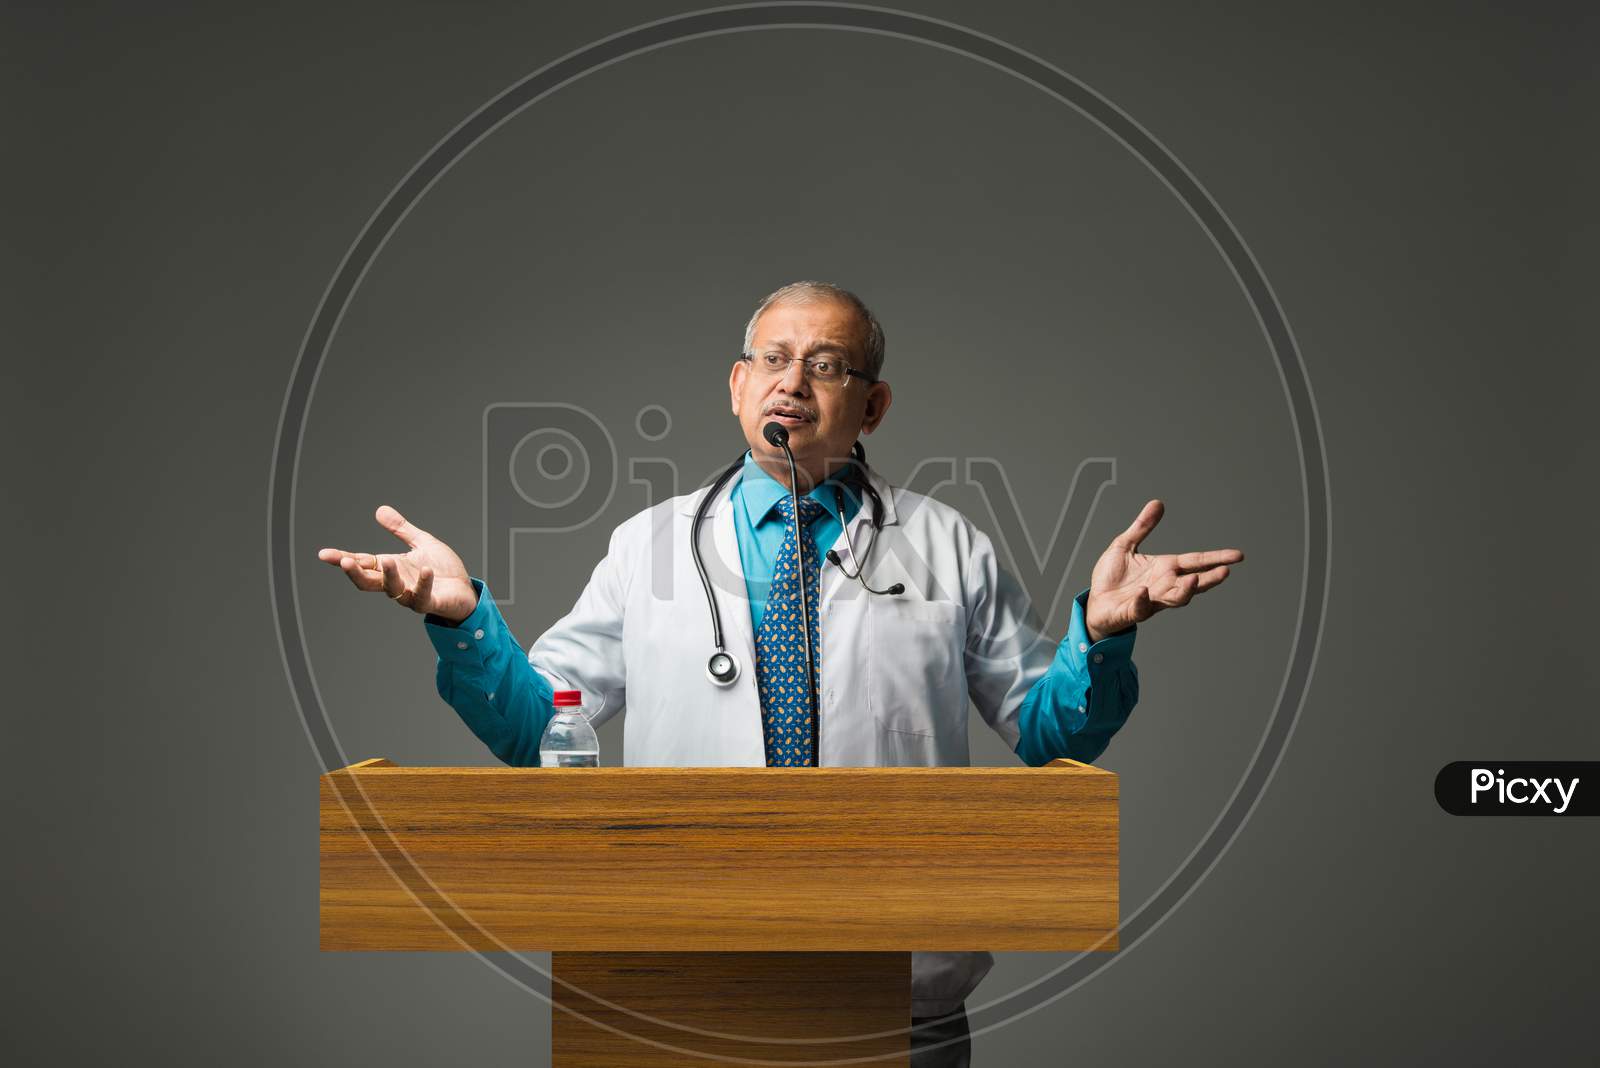 Senior Indian/asian male doctor speaking or giving lecture in mic. standing at podium and pointing something